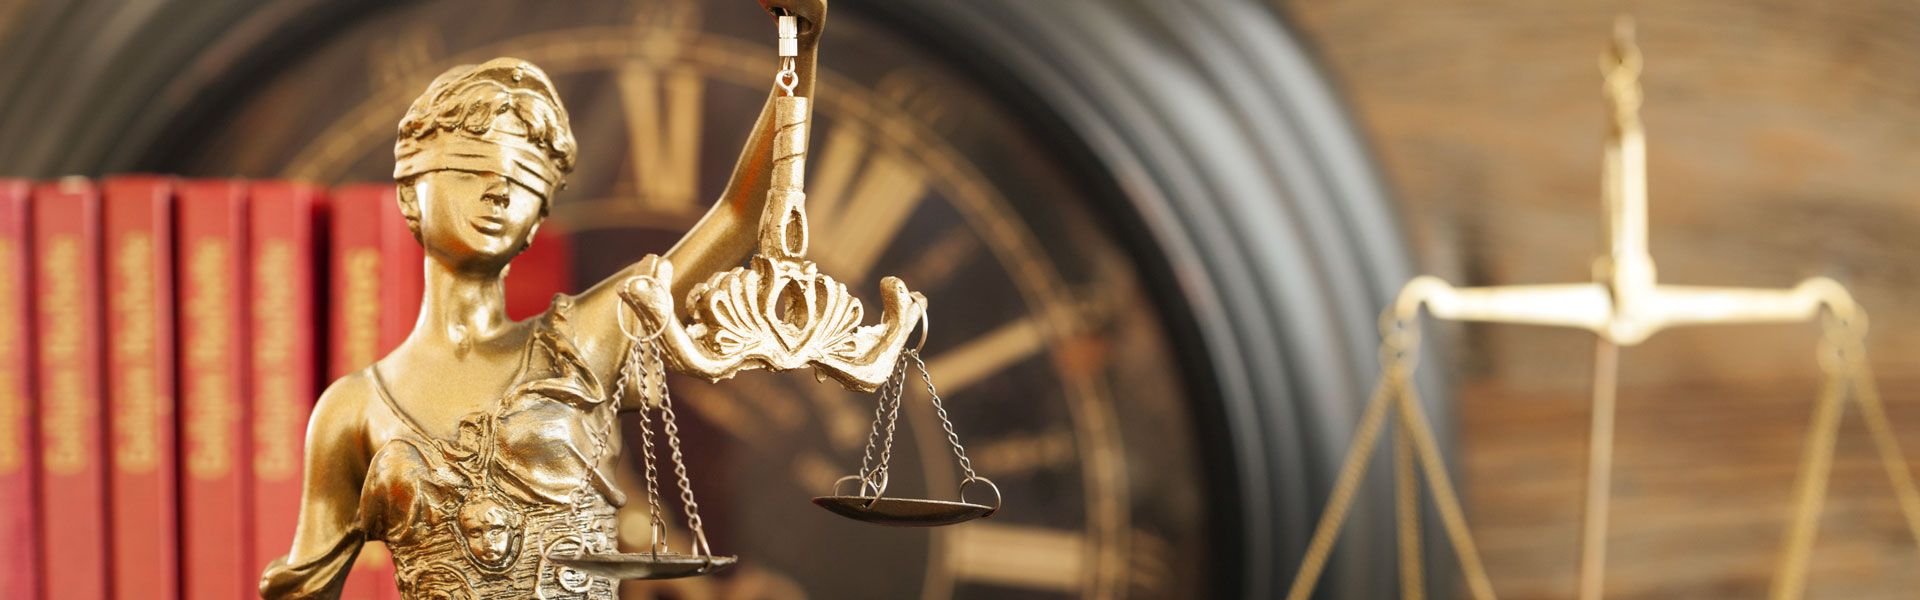 Scales of Justice | Ensuring Estate Plans to Help Your Assets go to Intended Beneficiaries